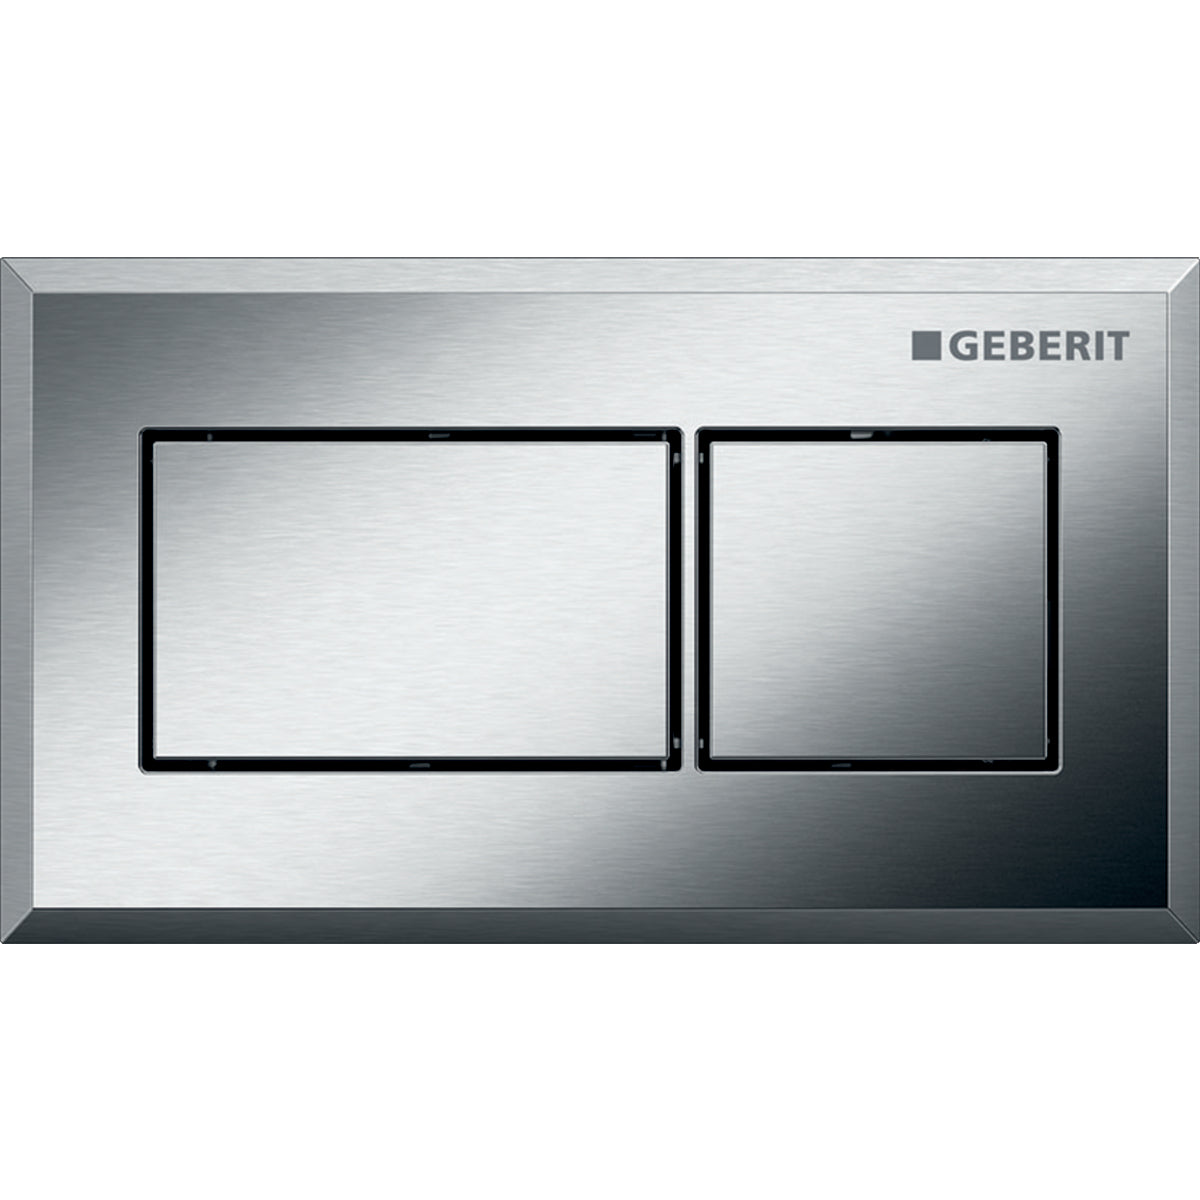 Geberit 116.051.GH.1- Geberit remote flush actuation, square design, pneumatic, for dual flush, concealed actuator: chrome-plated, brushed, easy-to-clean coated - FaucetExpress.ca